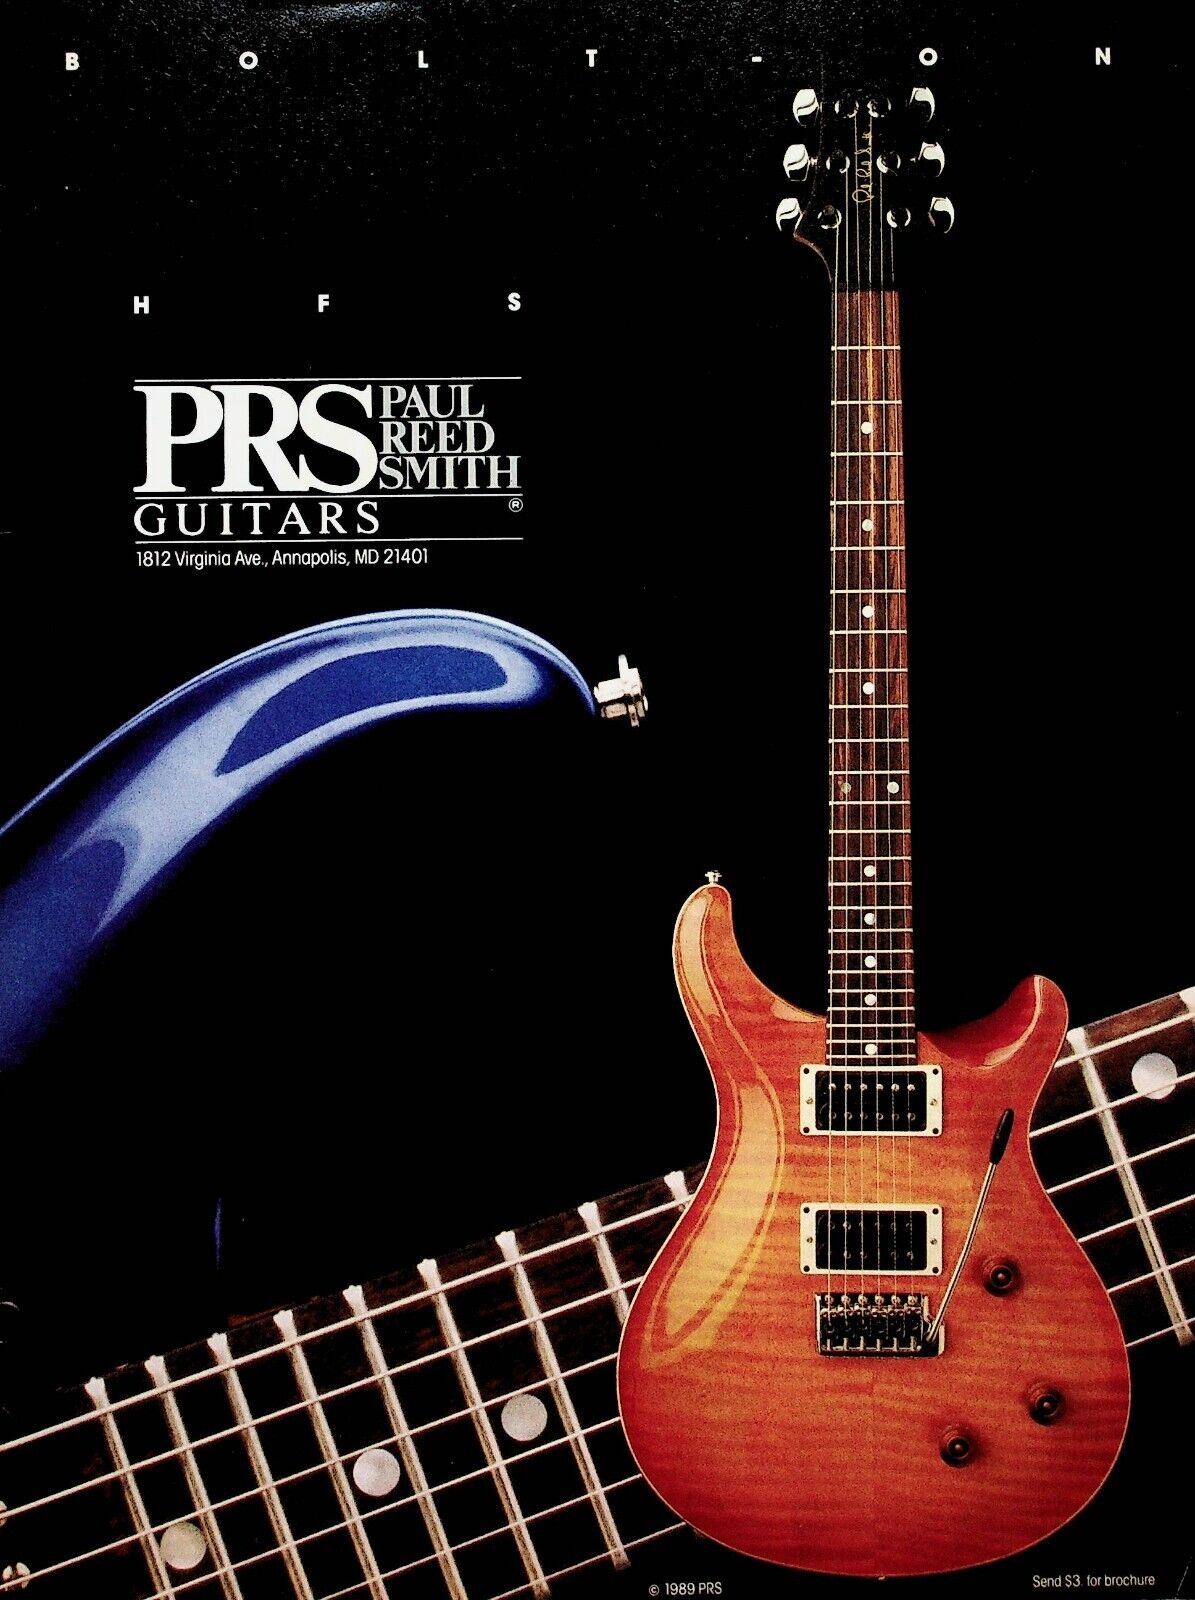 1990 Paul Reed Smith Guitars - Vintage Guitar Ad